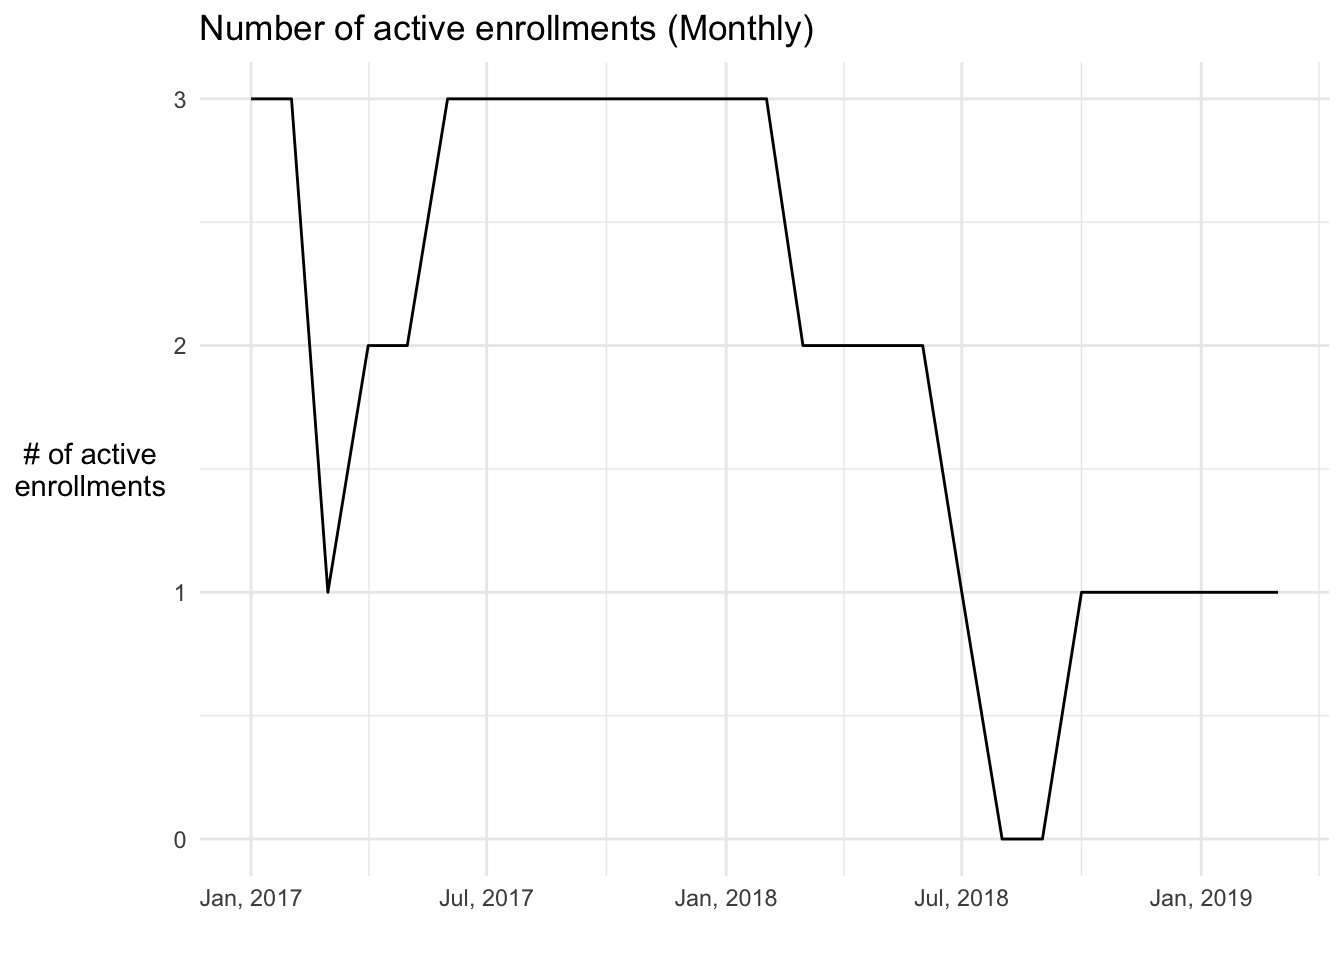 Line chart of monthly enrollments over time with a slight decrease in enrollments over the years